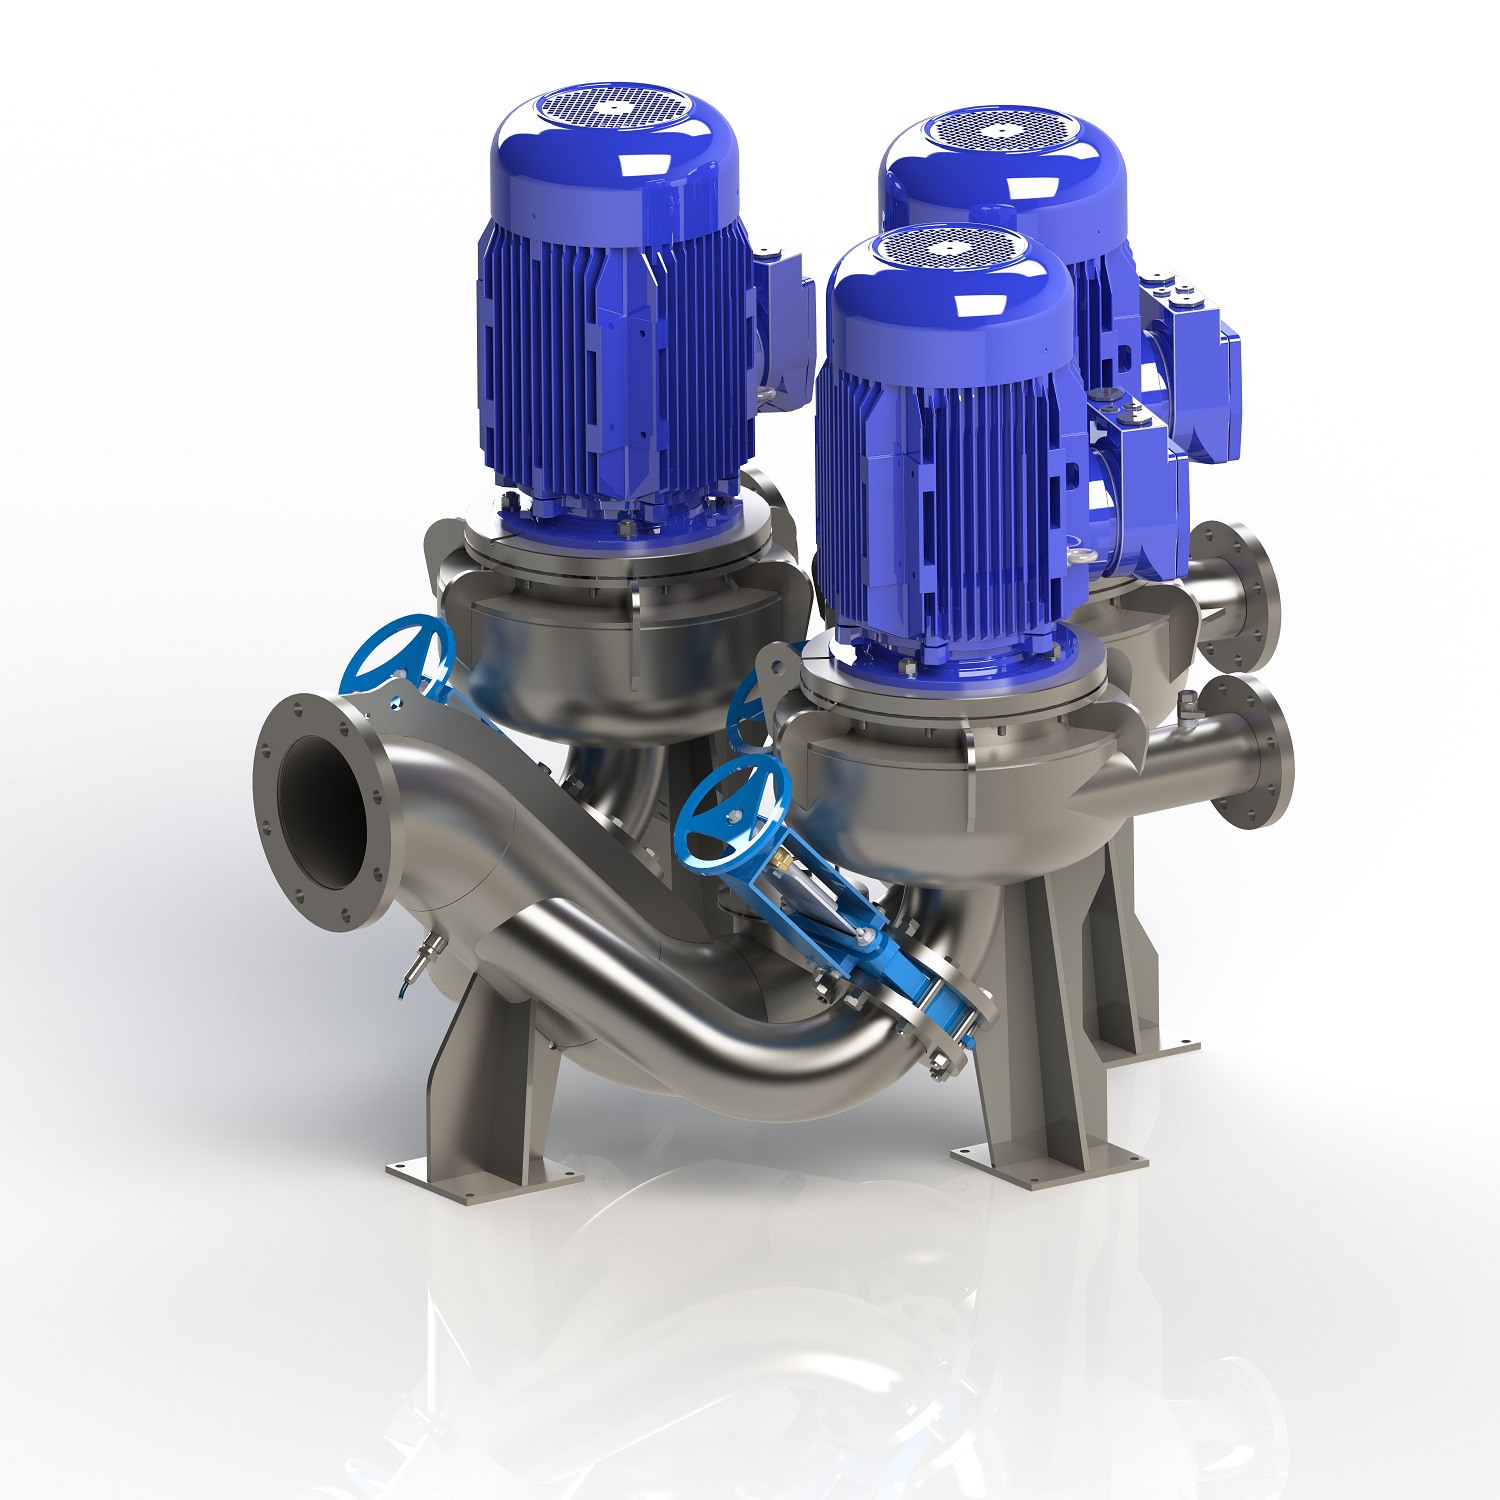 SIDE Industrie has added its DIP-T Triplex direct in-line pumping system to its DIP System range.